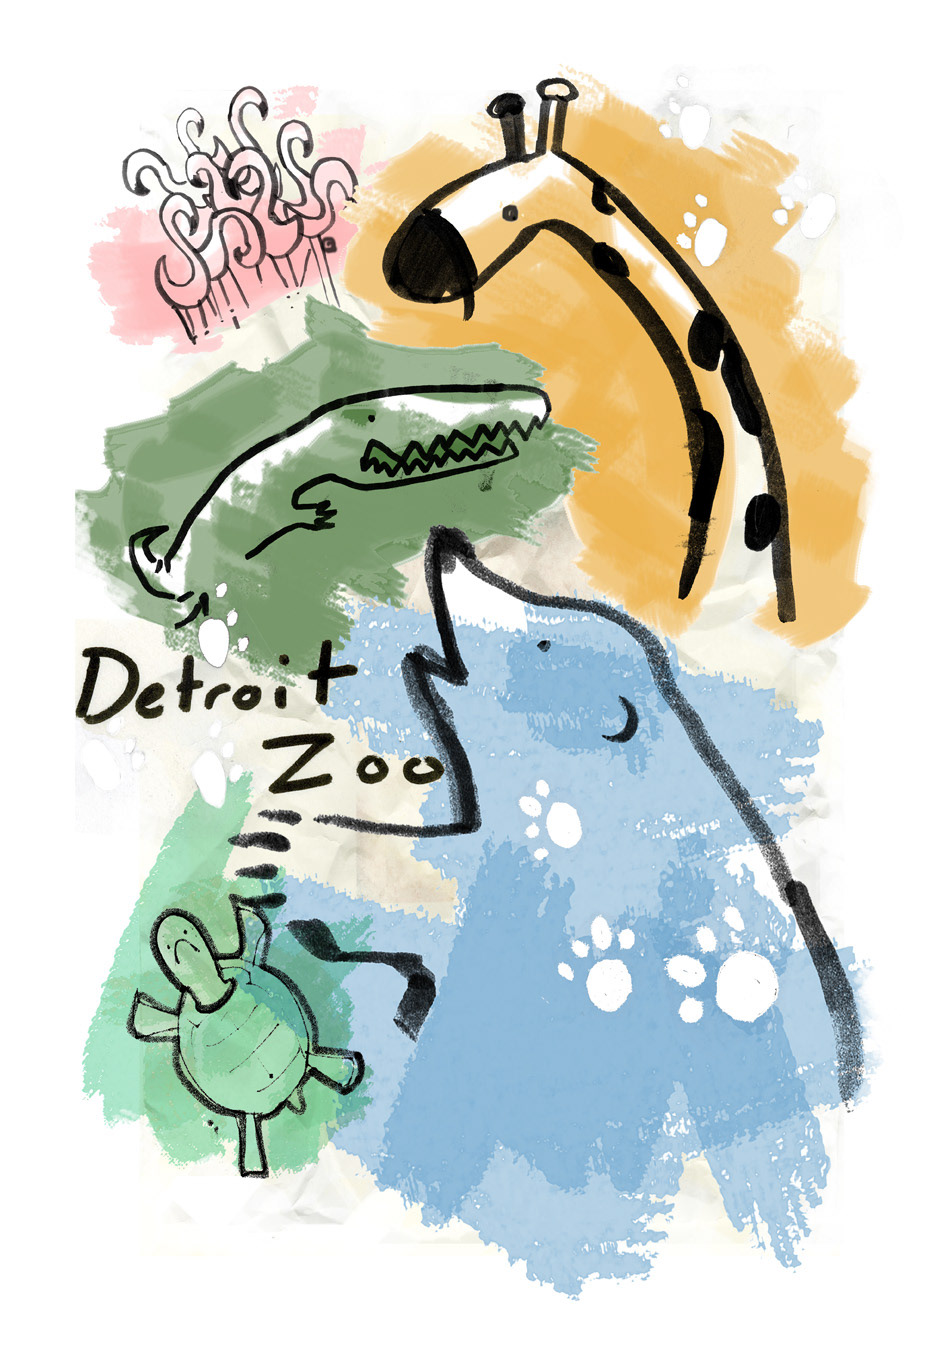 The Detroit Zoo poster